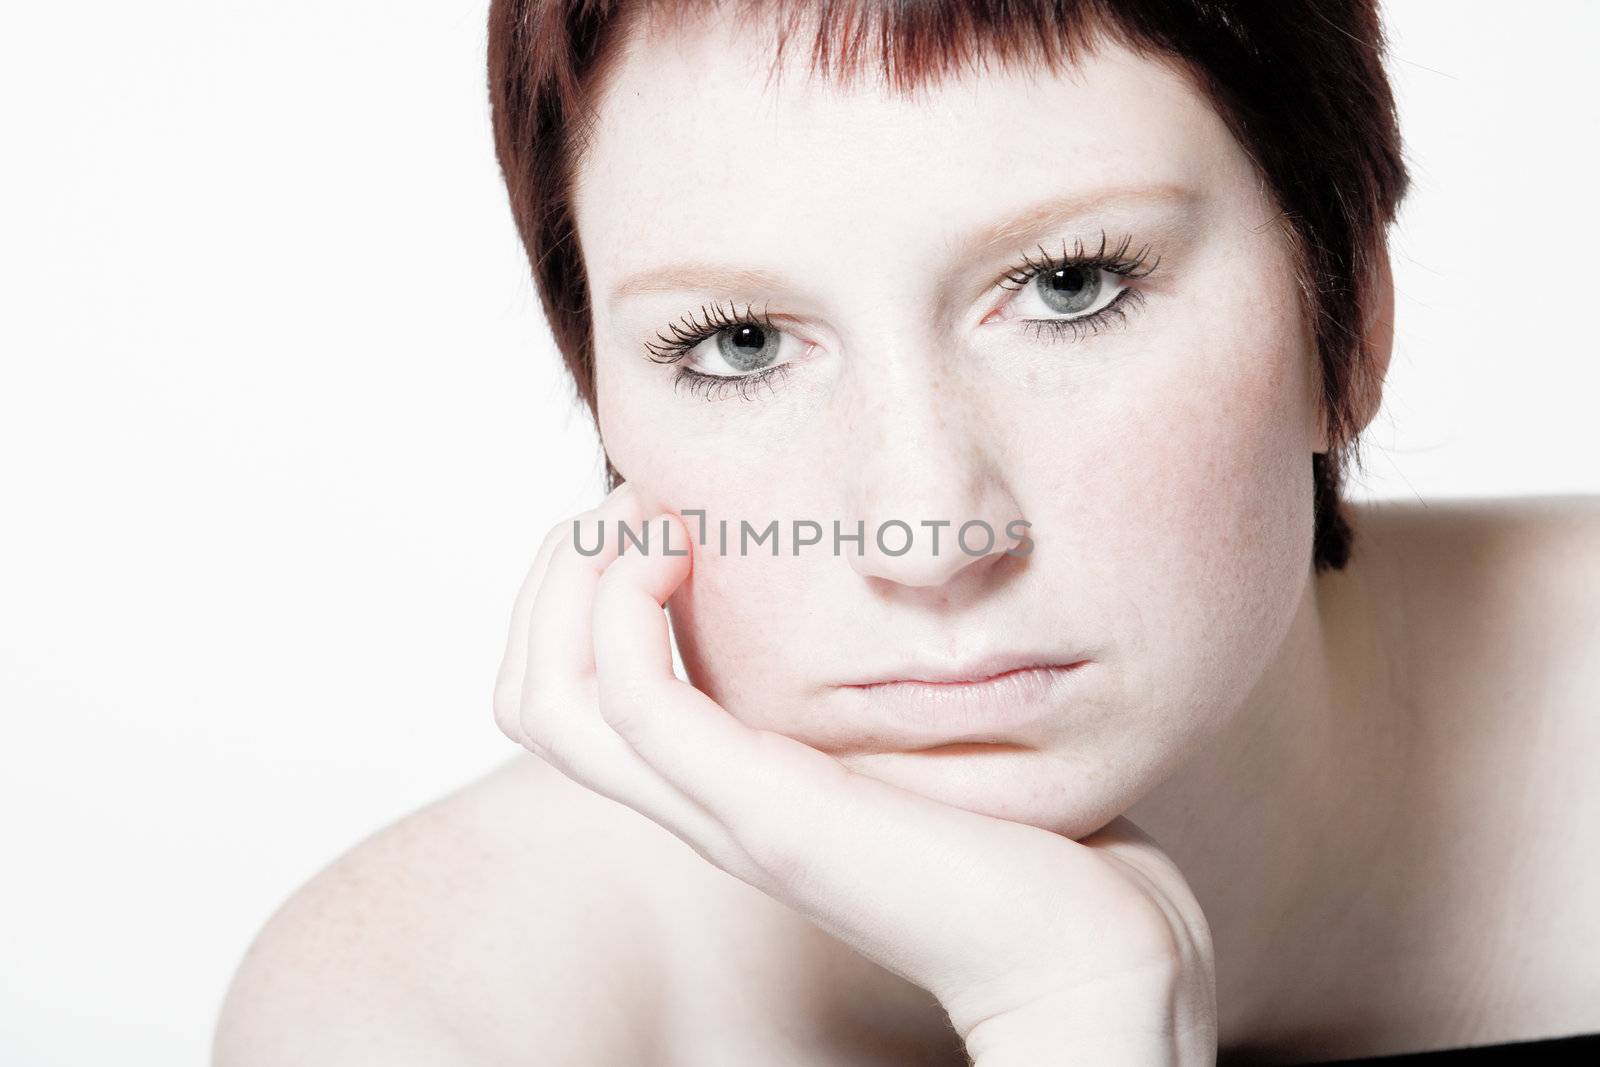 Studio portrait of a young woman with short hair looking uninterested